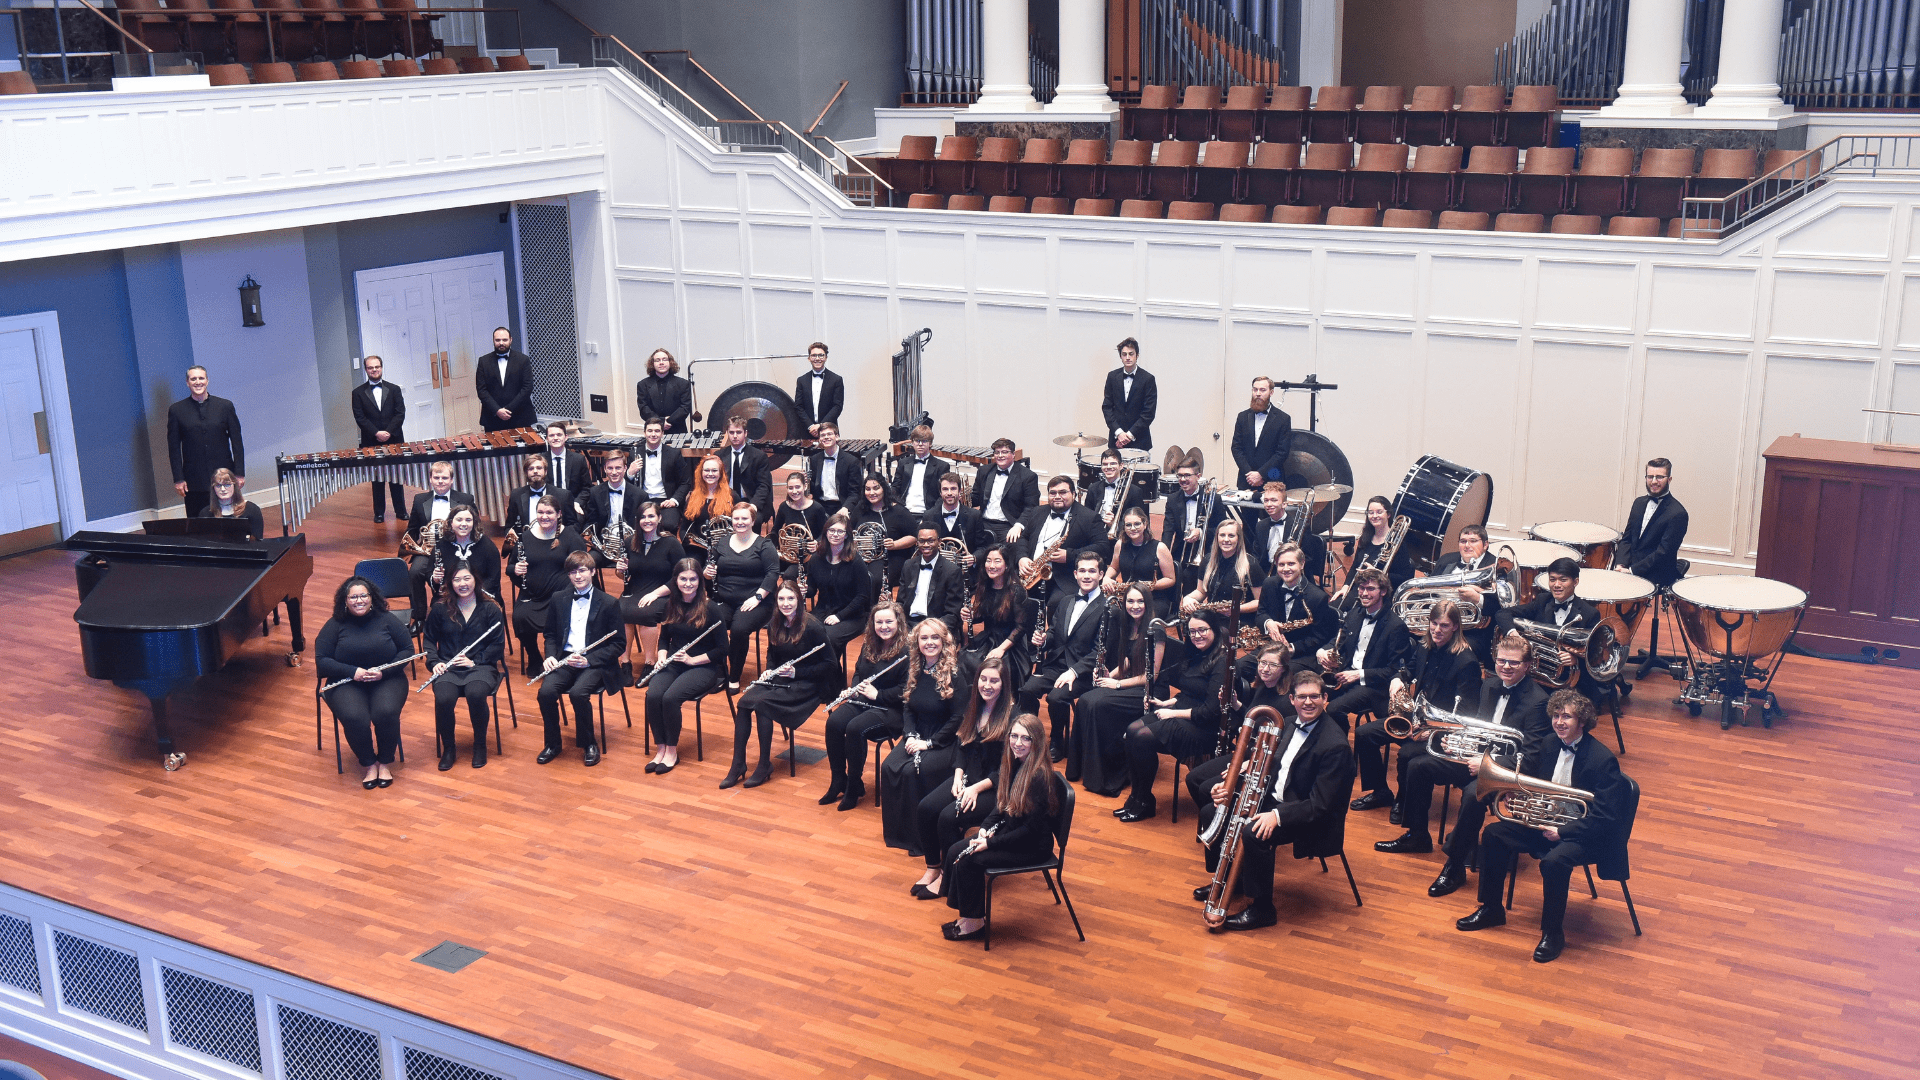 A group picture of the Belmont University College of Music and Performing Arts Wind Ensemble and Concert Band